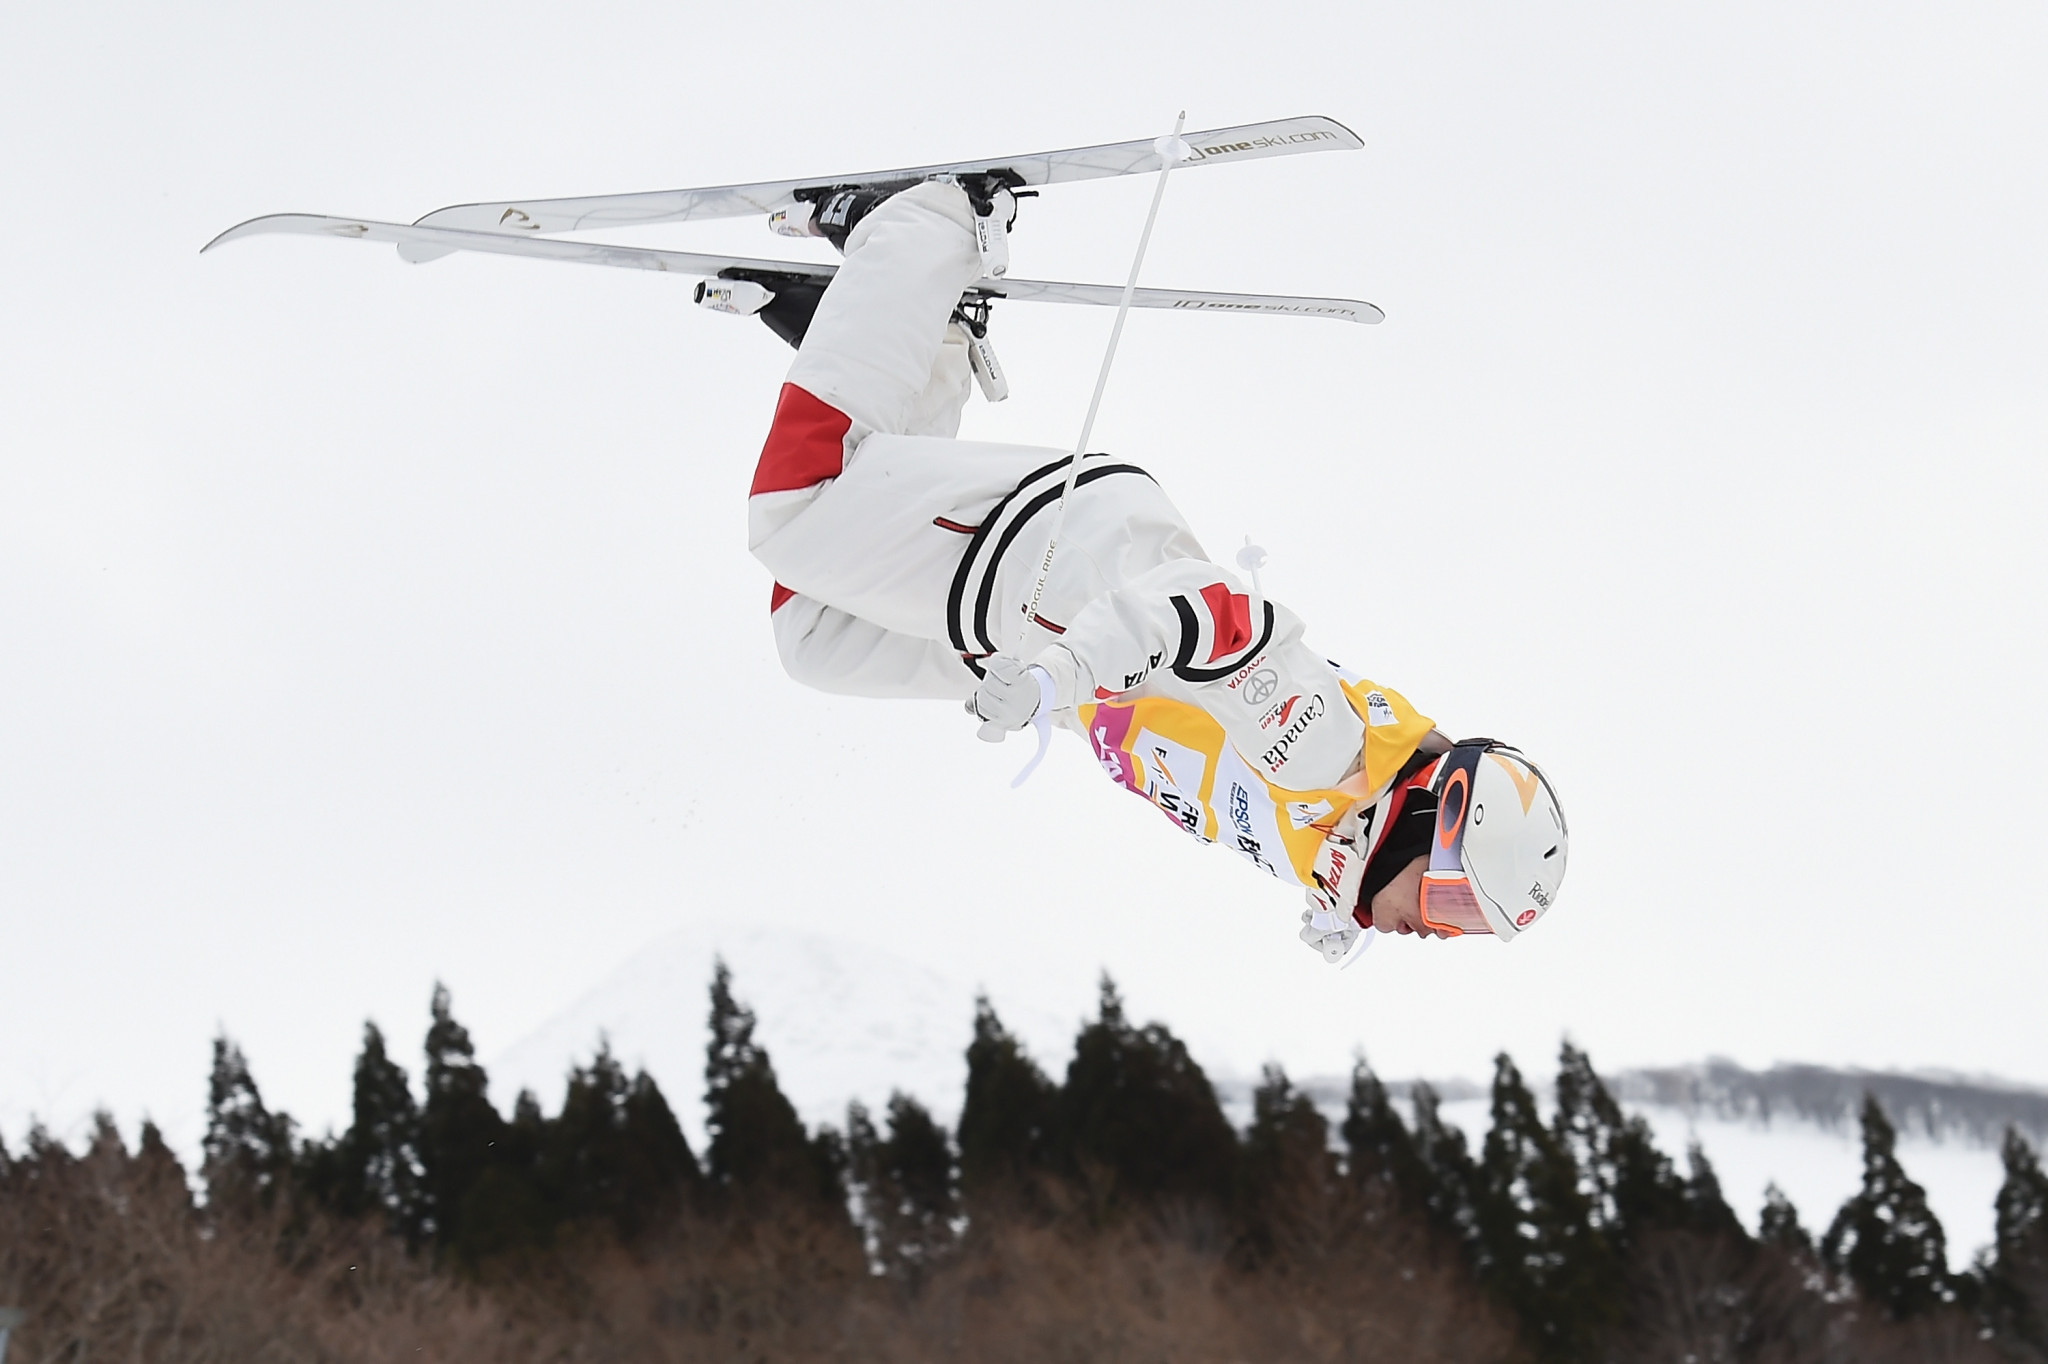 Canada's Mikaël Kingsbury has already wrapped up the FIS Moguls World Cup title for men ©Getty Images